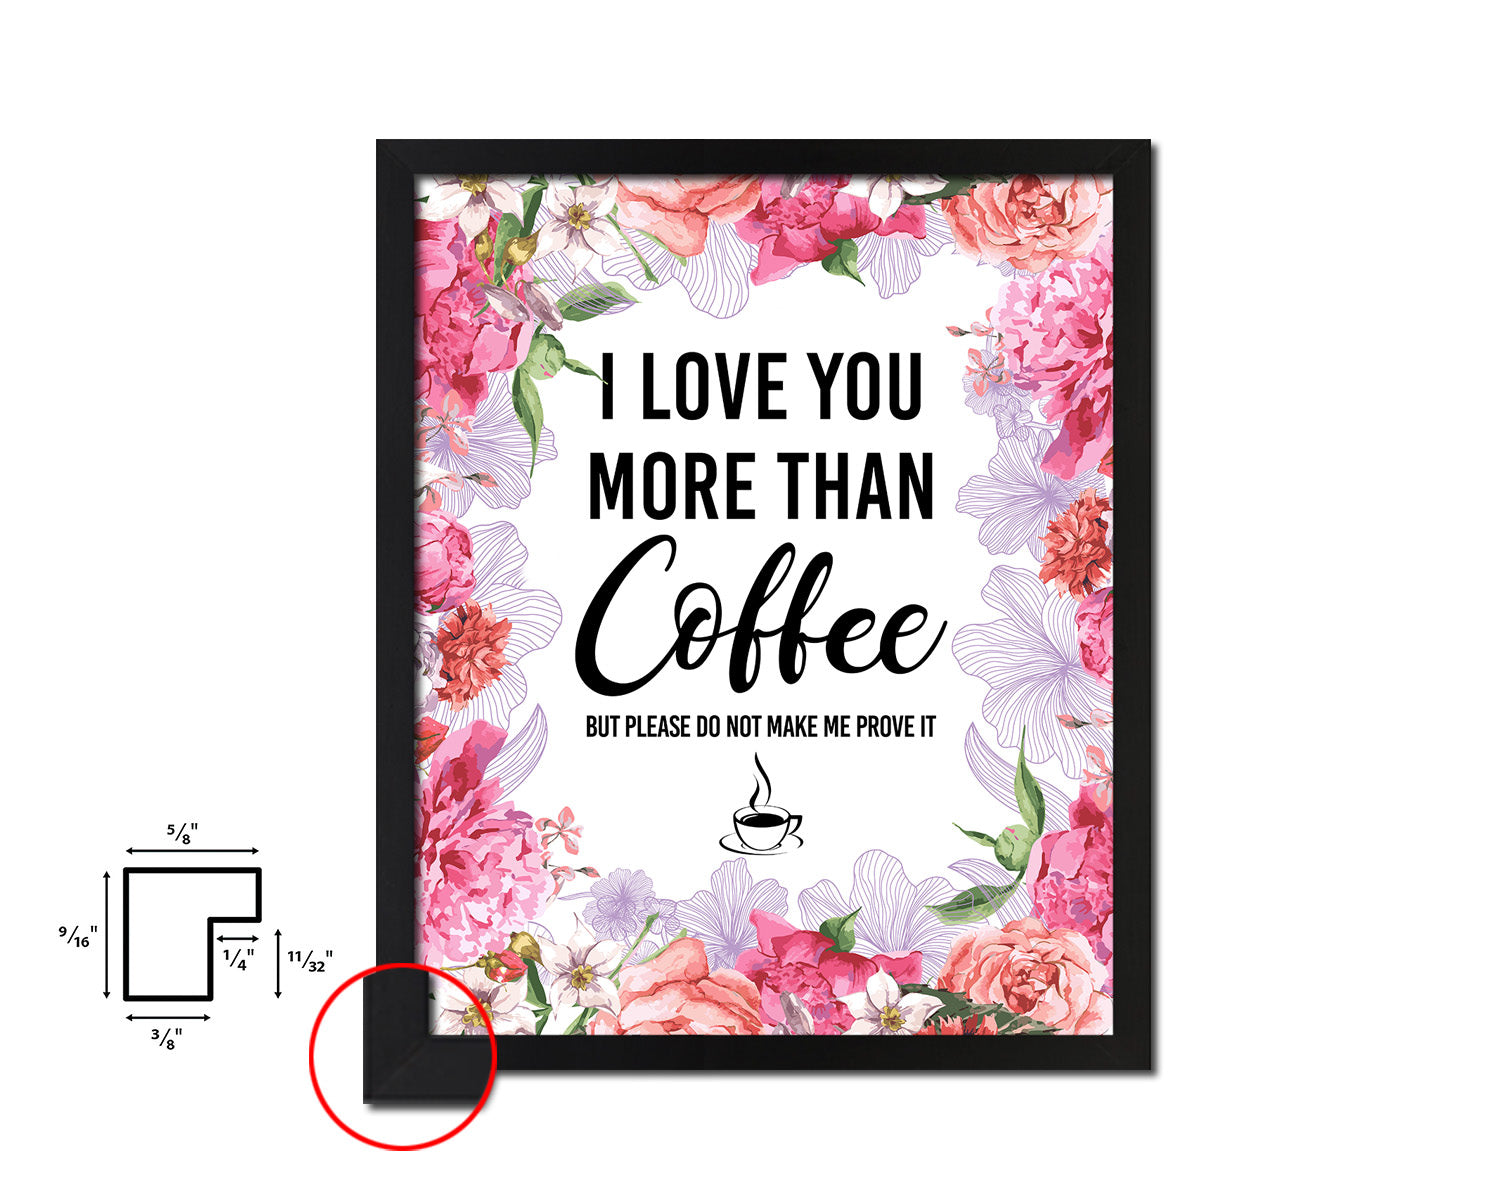 I love you more than coffee but please do not make me prove it Quote Framed Artwork Print Wall Decor Art Gifts